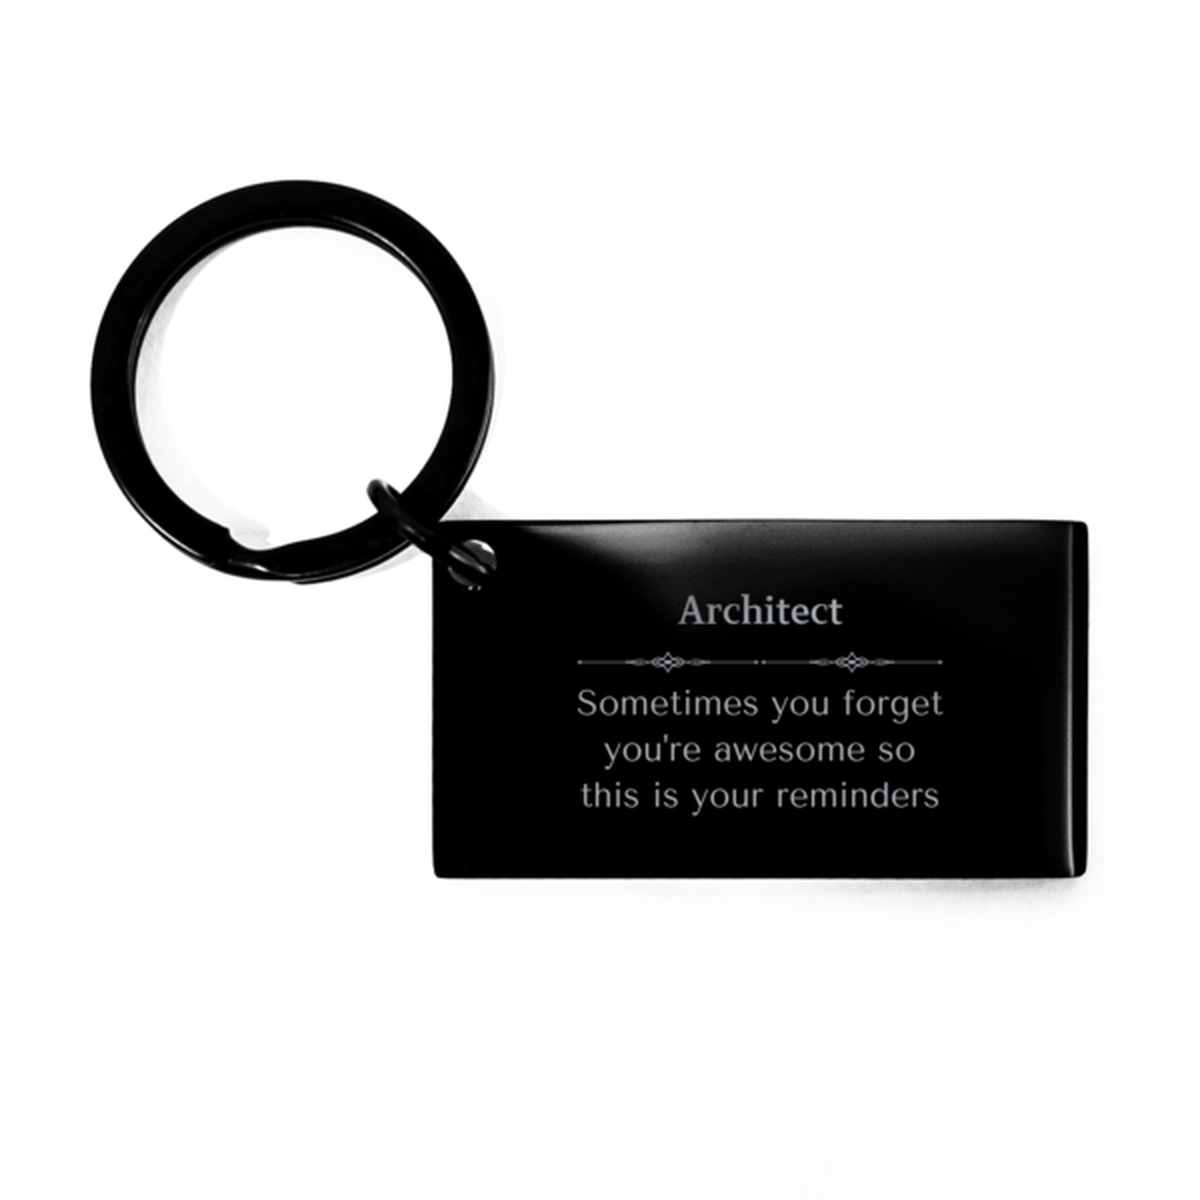 Sentimental Architect Keychain, Comedian Sometimes you forget you're awesome so this is your reminders, Graduation Christmas Birthday Gifts for Architect, Men, Women, Coworkers